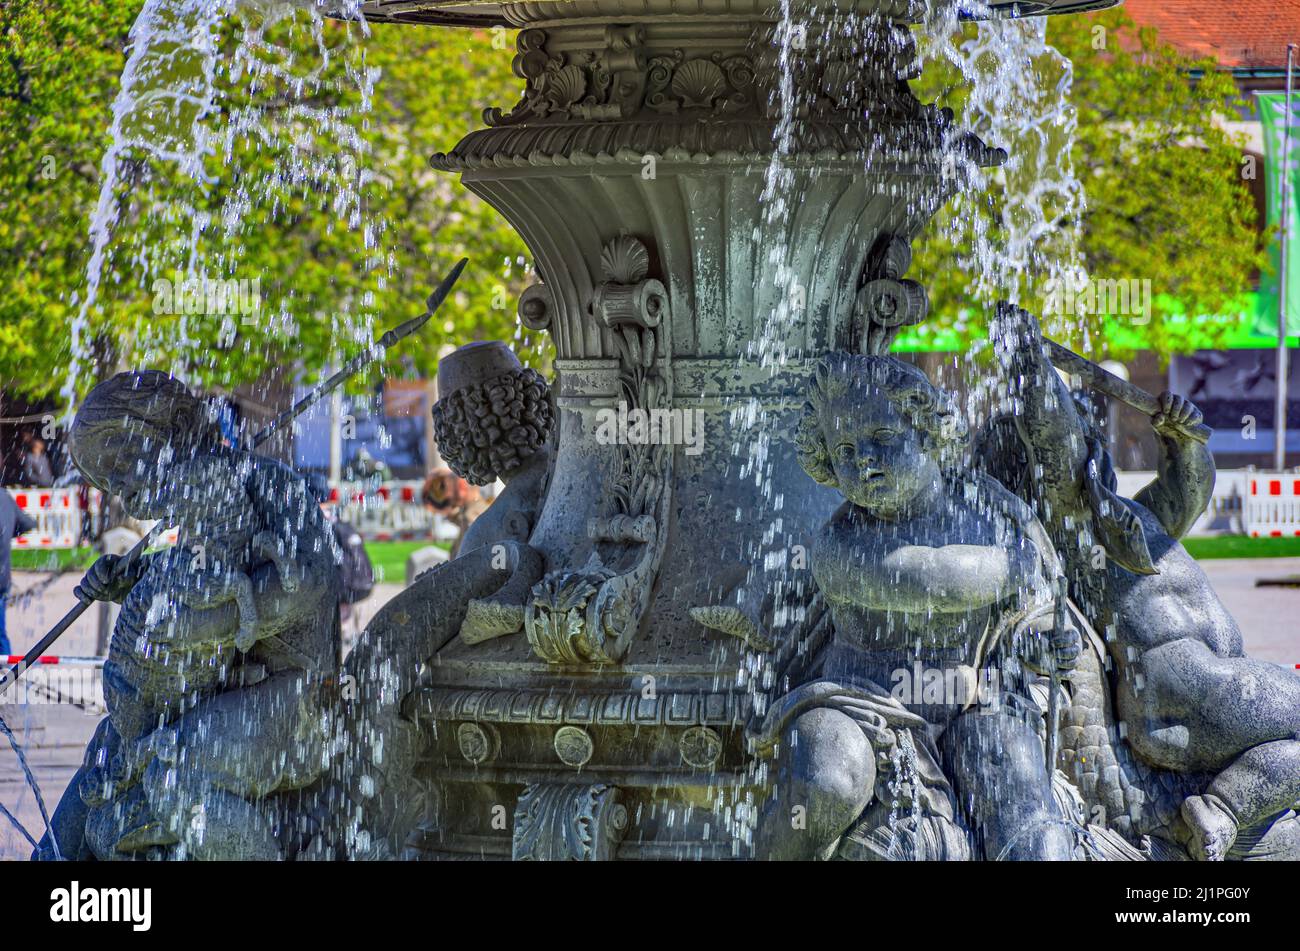 Fountain with putti on Schlossplatz in front of New Palace (Neues Schloss) in Stuttgart, Baden-Württemberg, Germany. Stock Photo